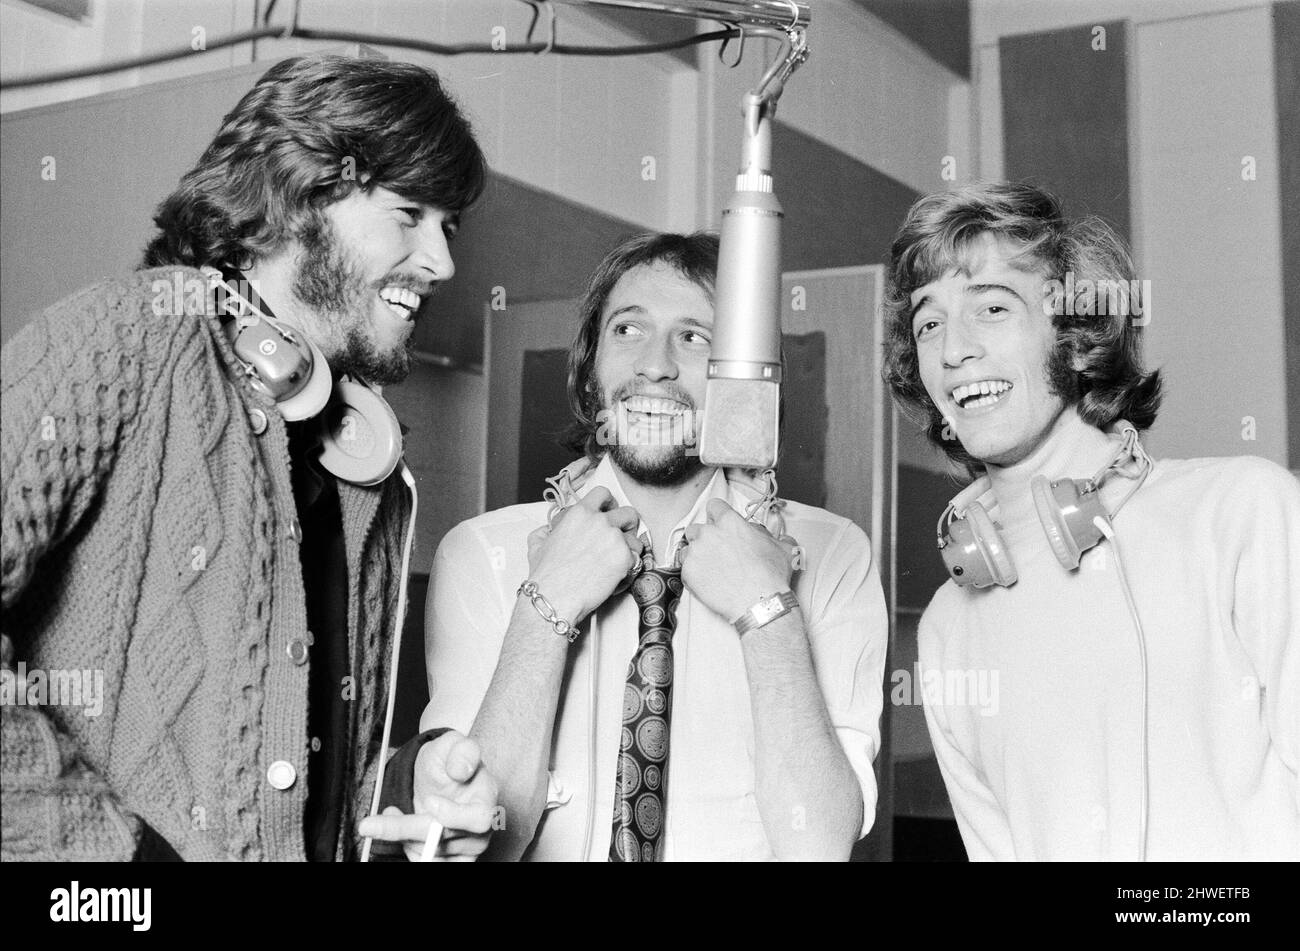 The Gibb Brothers a.k.a. The Bee Gees, newly reunited & back in the recording studio together, Soho London 3rd September 1970.   Hard at work on their first united venture in nearly two years.    Barry Gibb (24), who married former beauty queen Linda Gray 2 days earlier (1st sept.), broke his honeymoon to join his twin brothers Robin & Maurice Gibb in the studio. Stock Photo